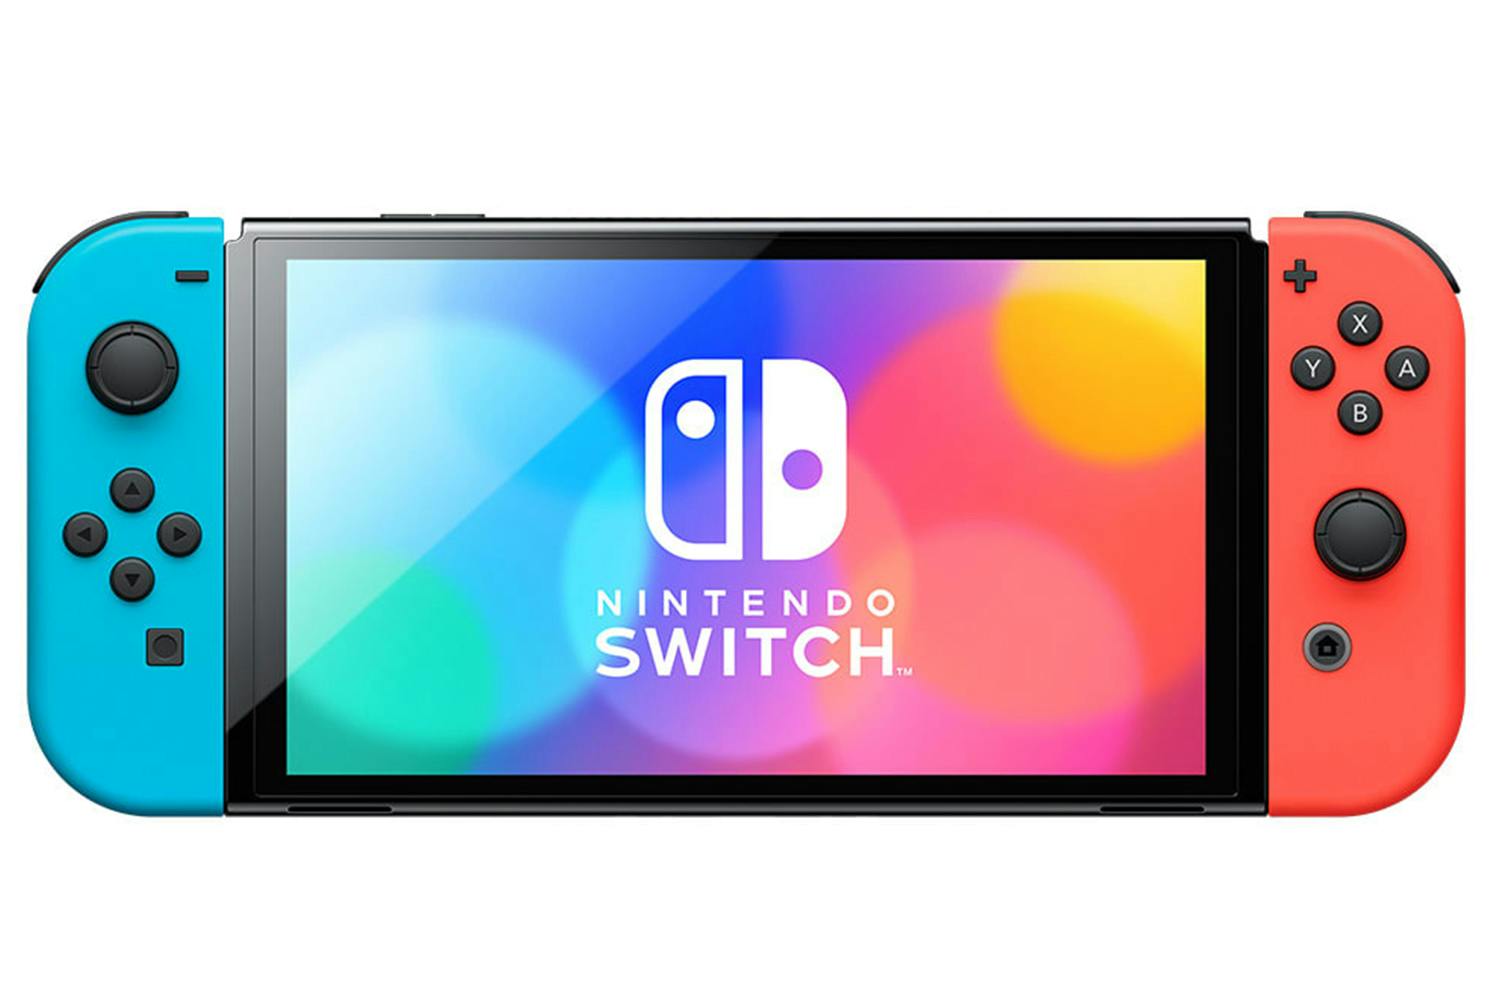 Nintendo Switch OLED Model | Neon Blue/Neon Red